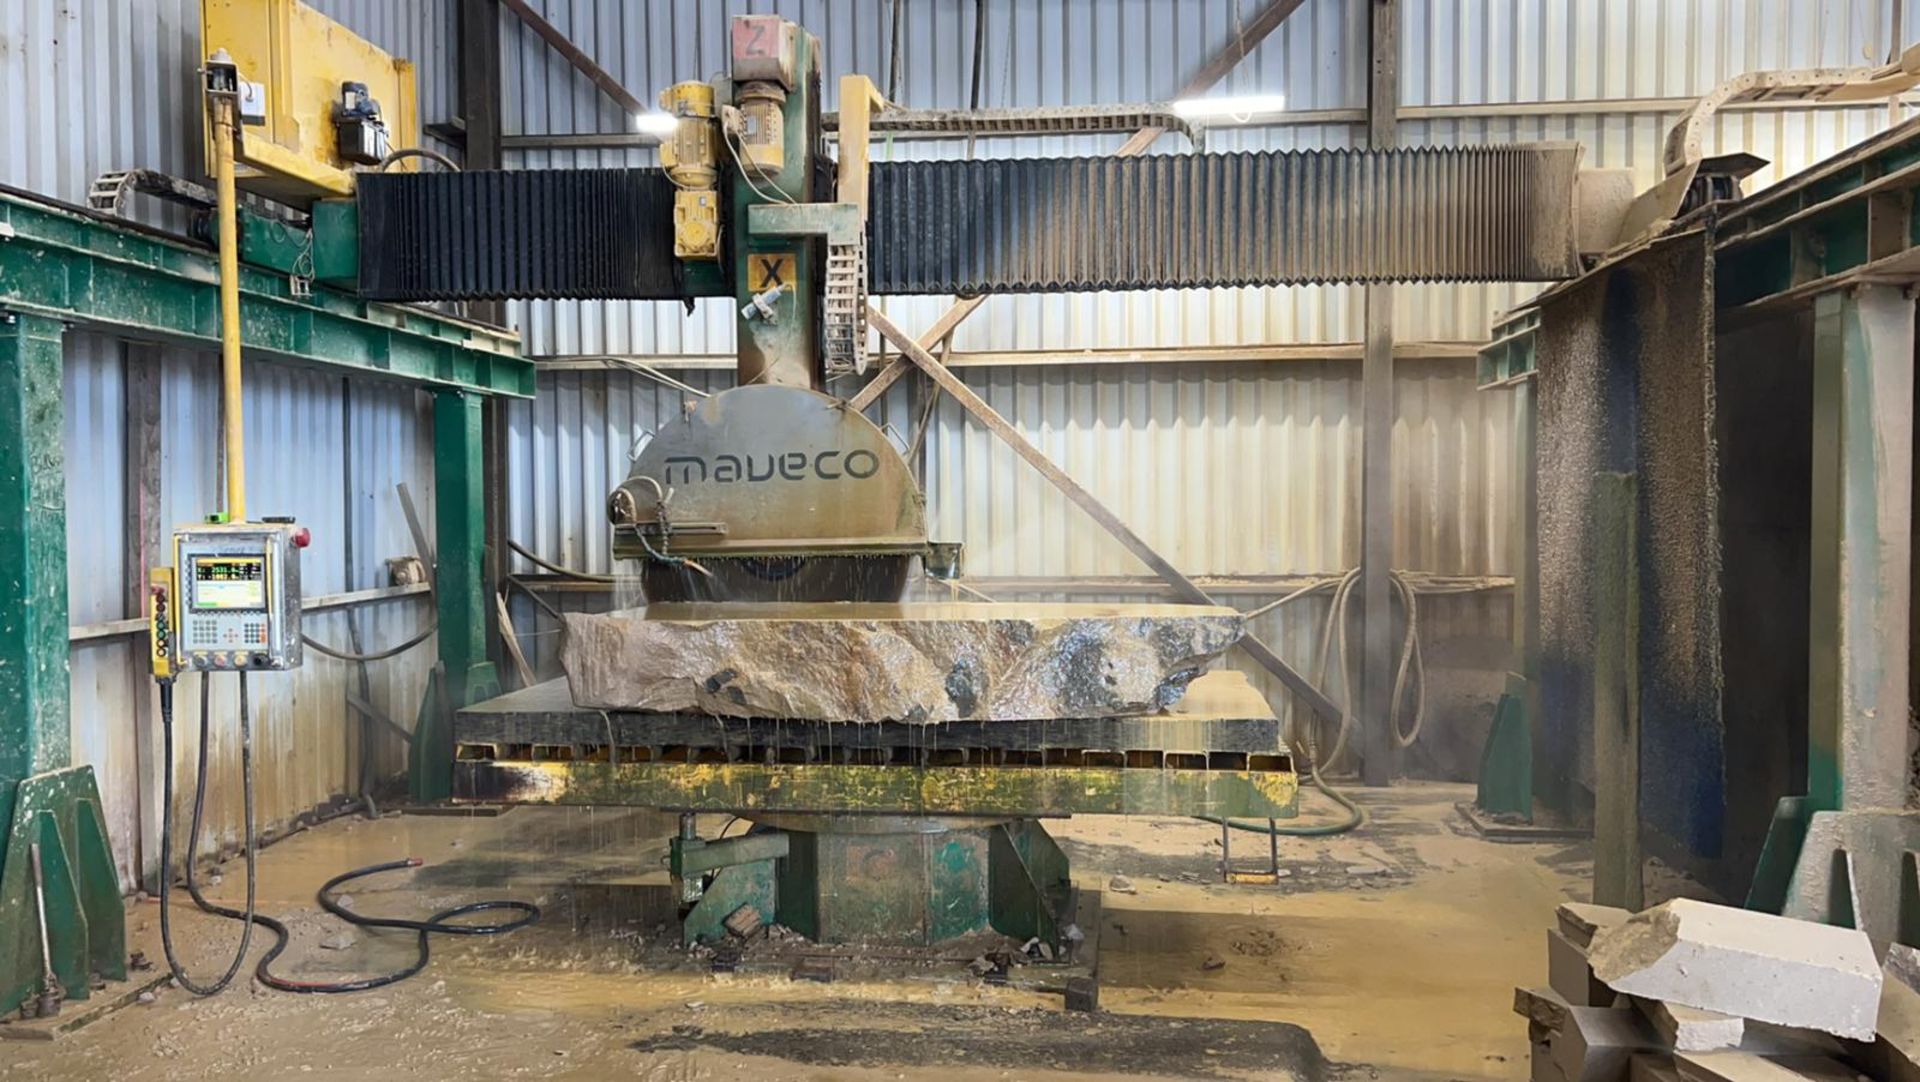 Maveco 1200 automatic Stone Saw Still in use every day Good condition  cuts like new well serviced - Image 6 of 6